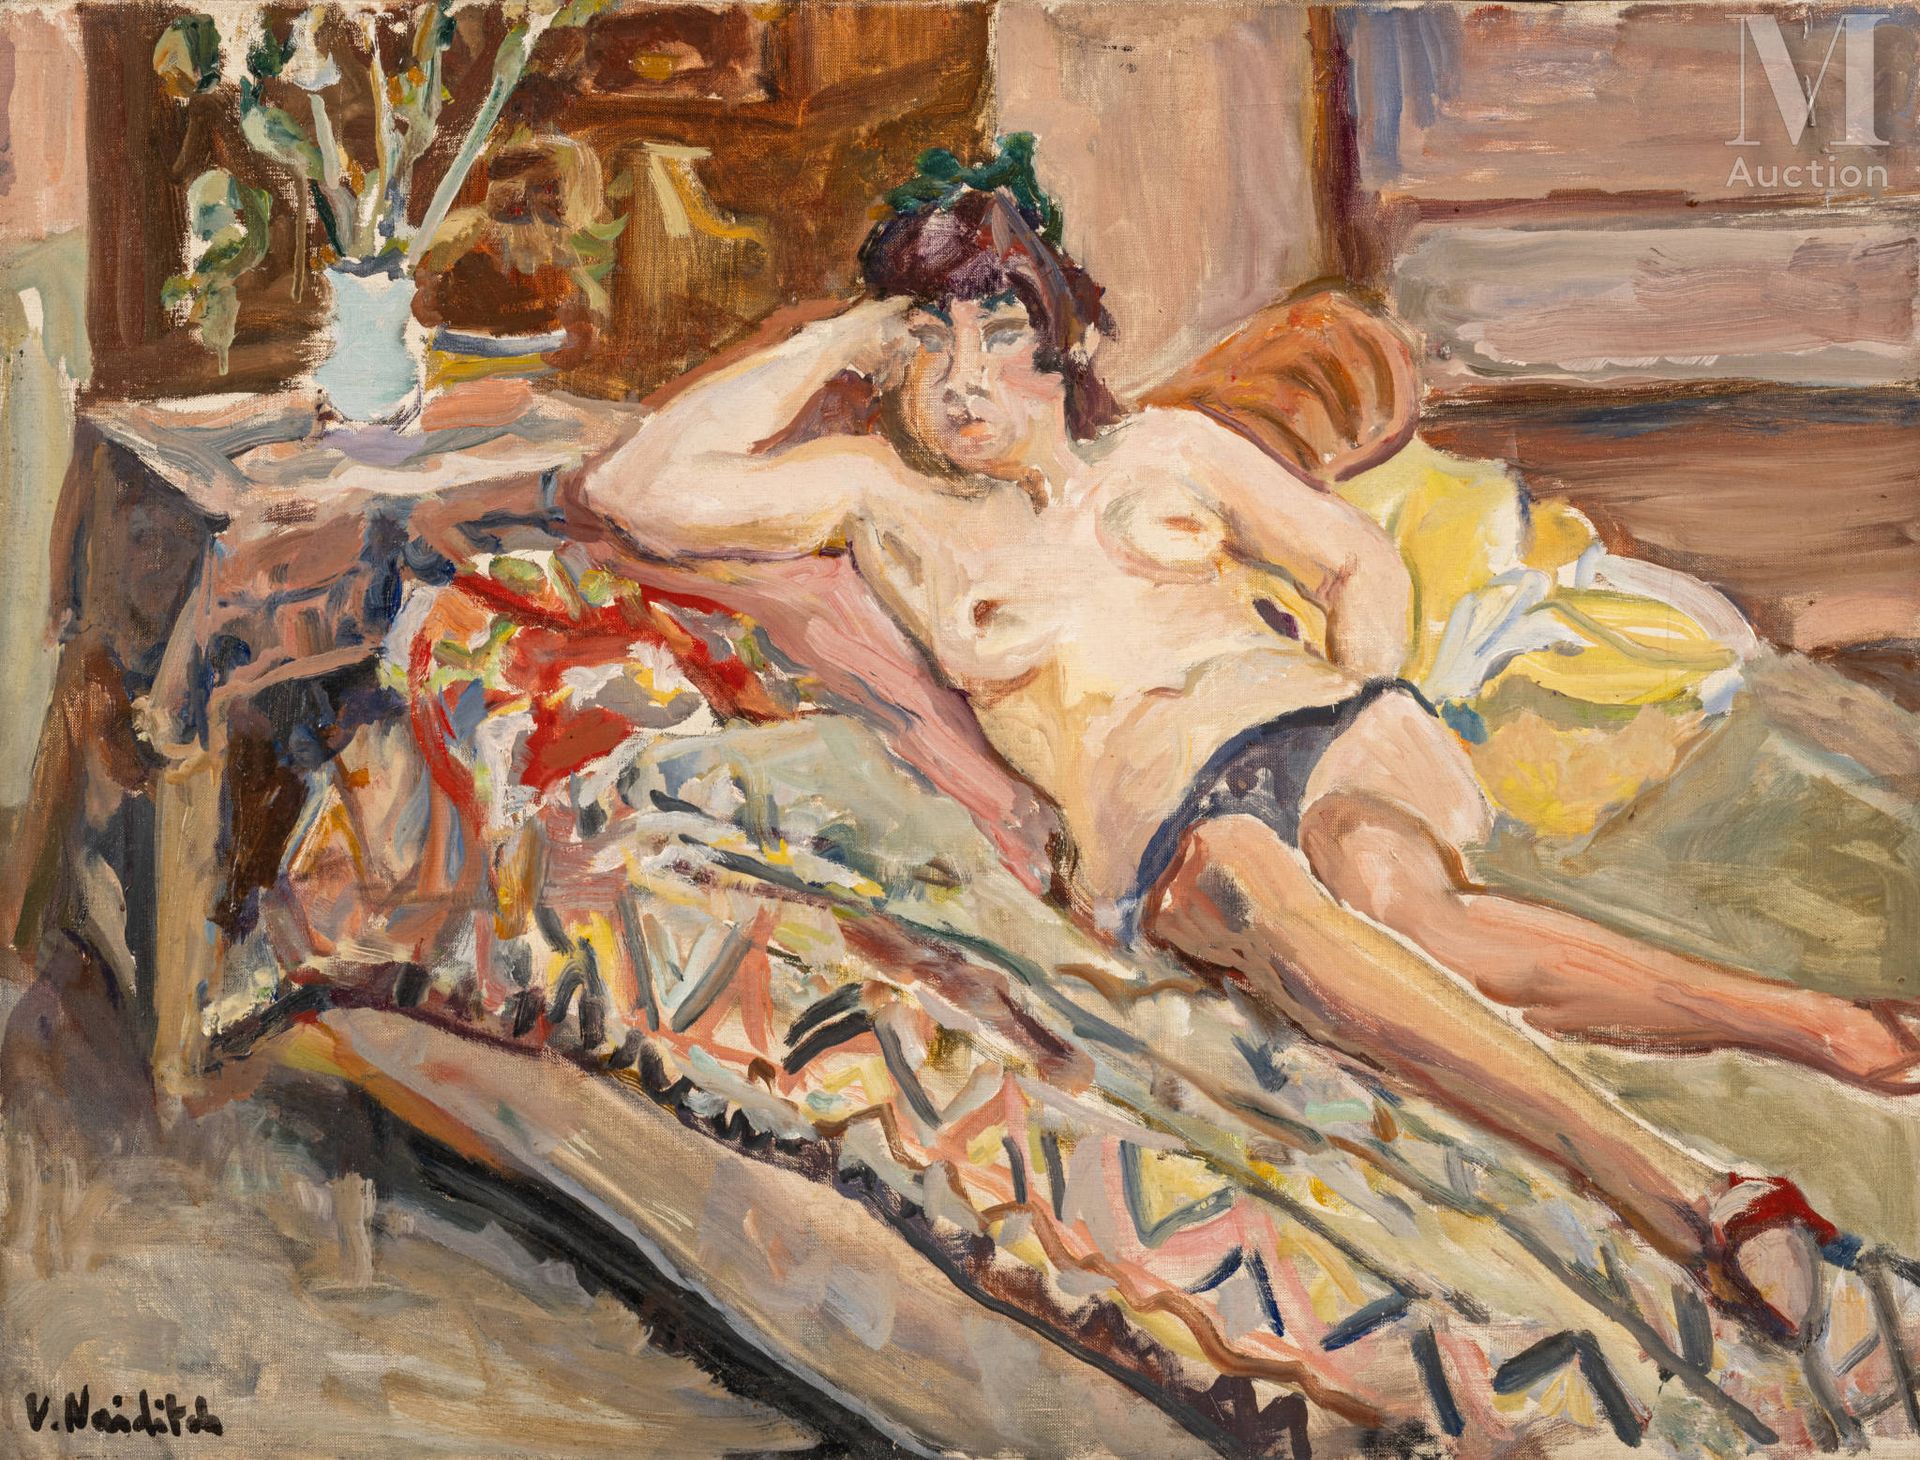 Vladimir NAIDITCH (Moscou 1903 - Paris 1981) Naked on the couch

Oil on canvas
4&hellip;